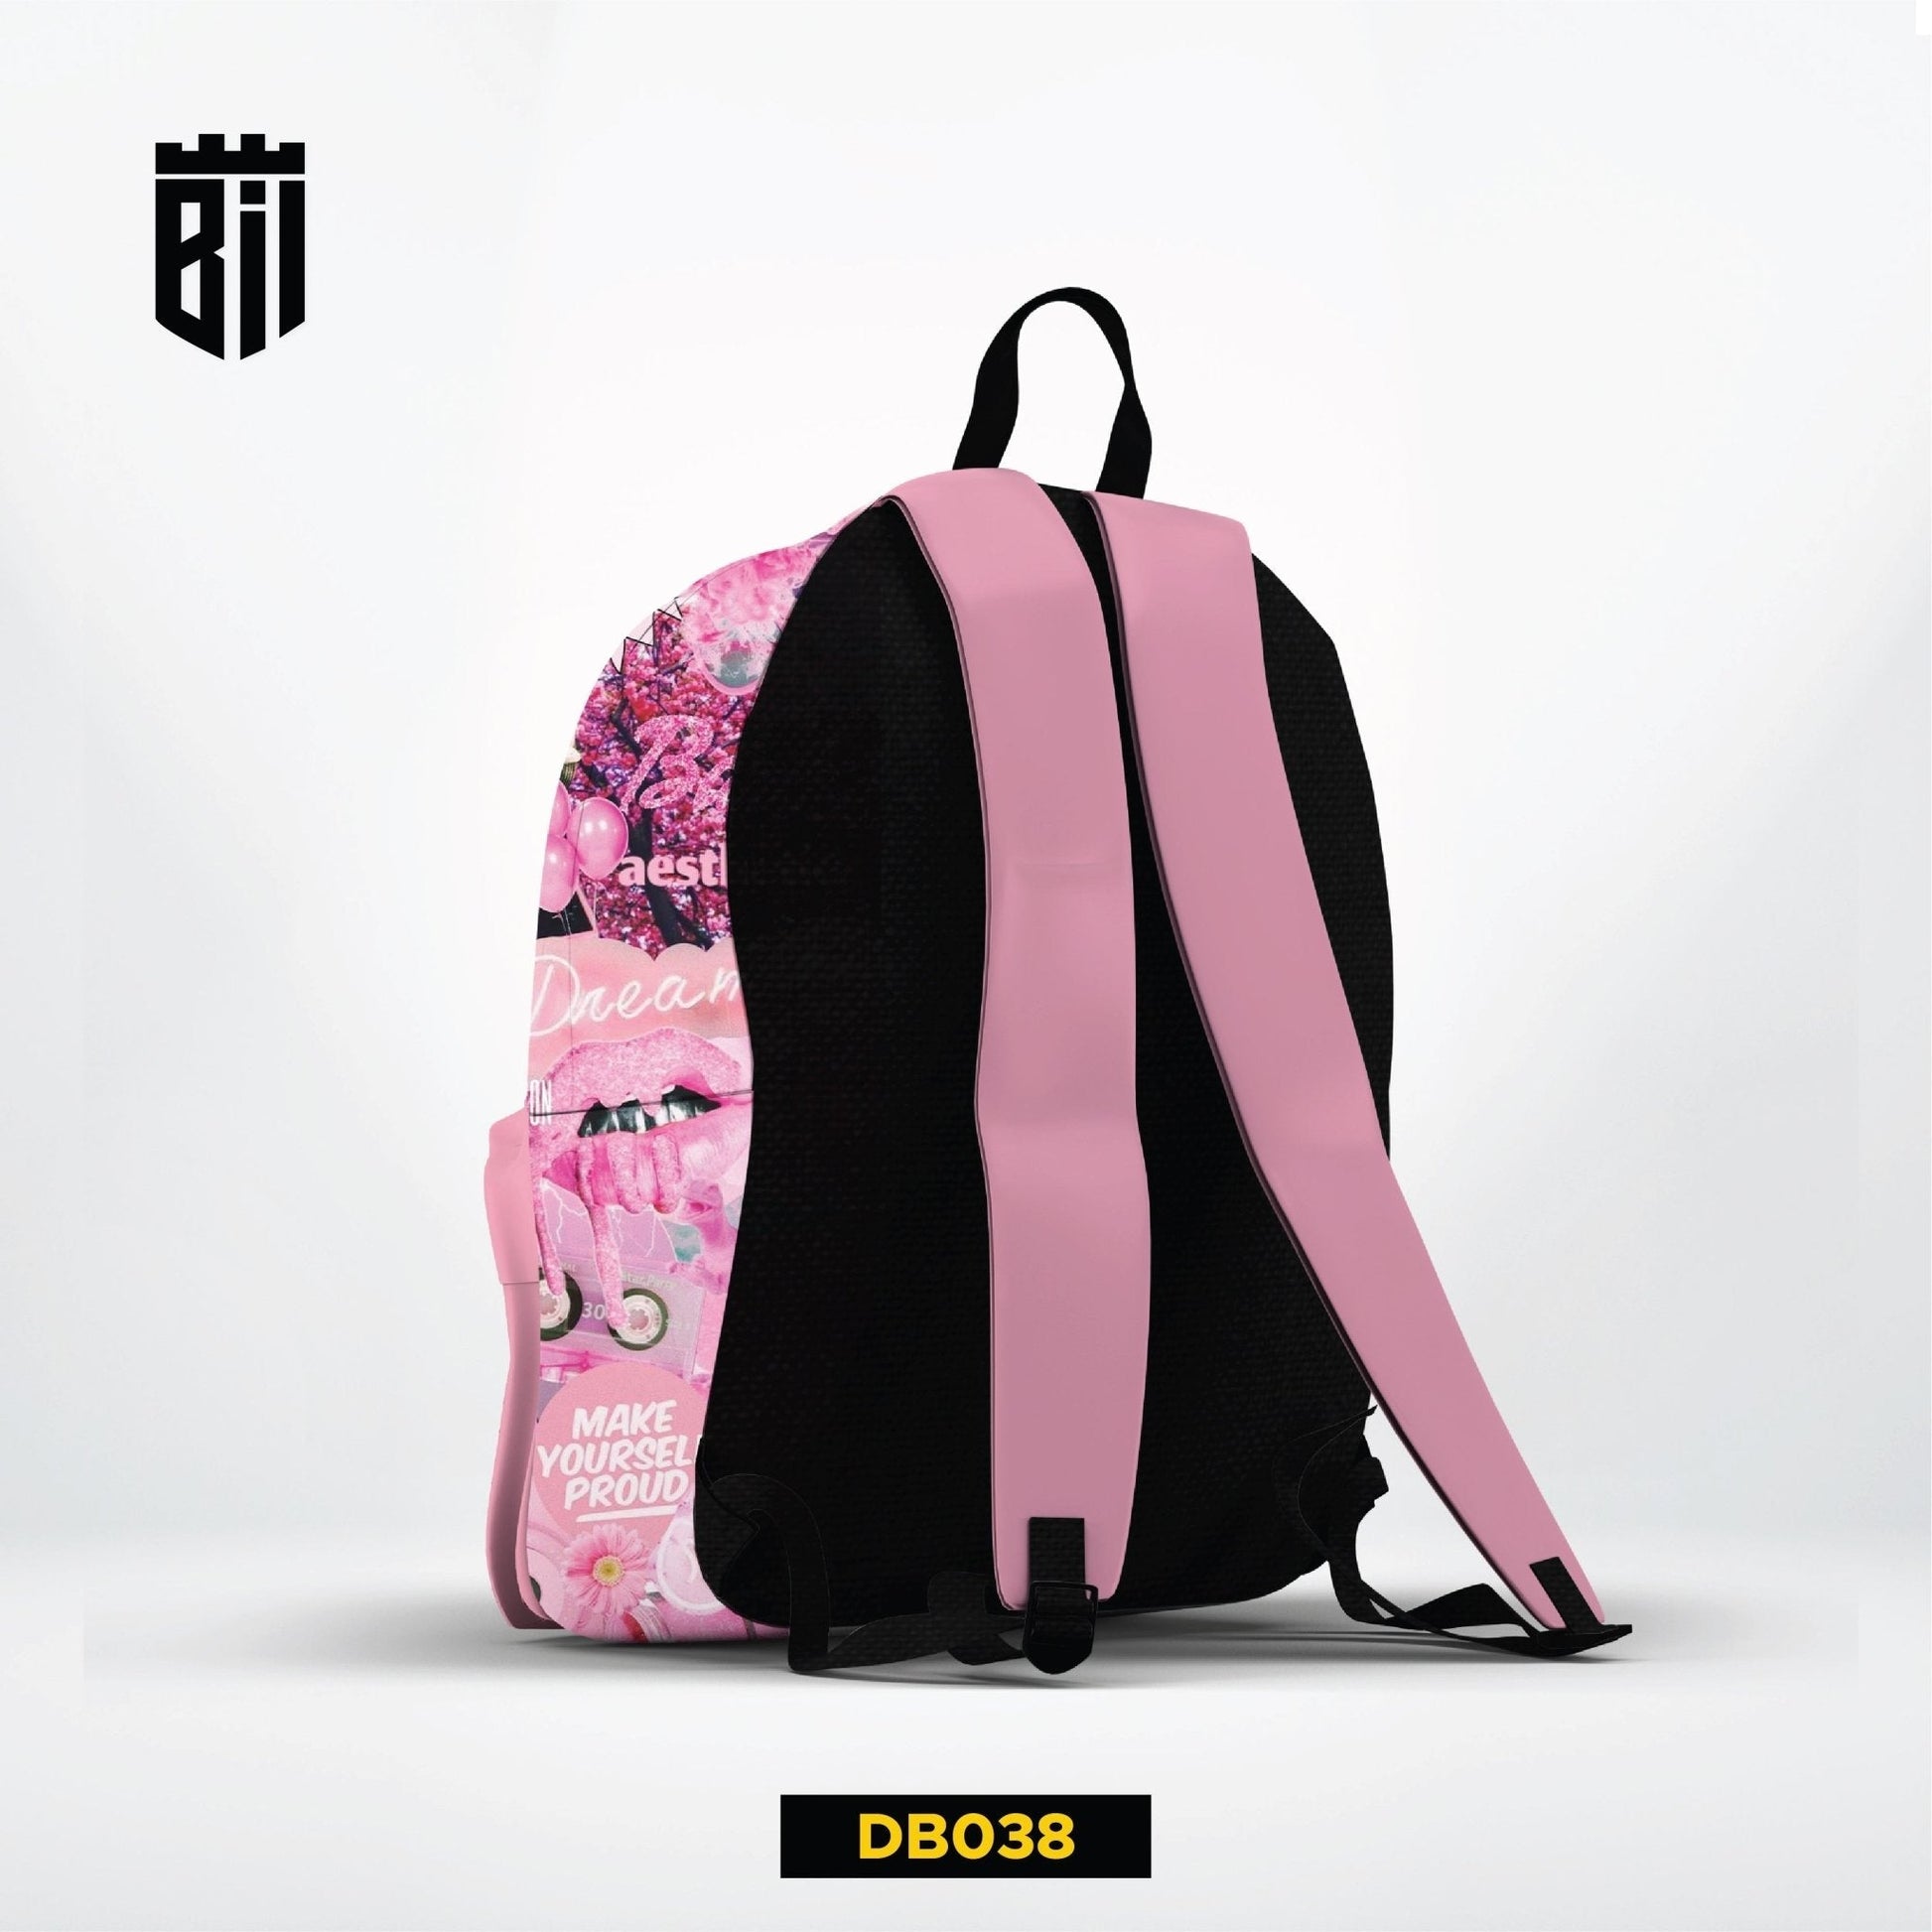 DB038 Aesthetic Pink Allover Printed Backpack - BREACHIT